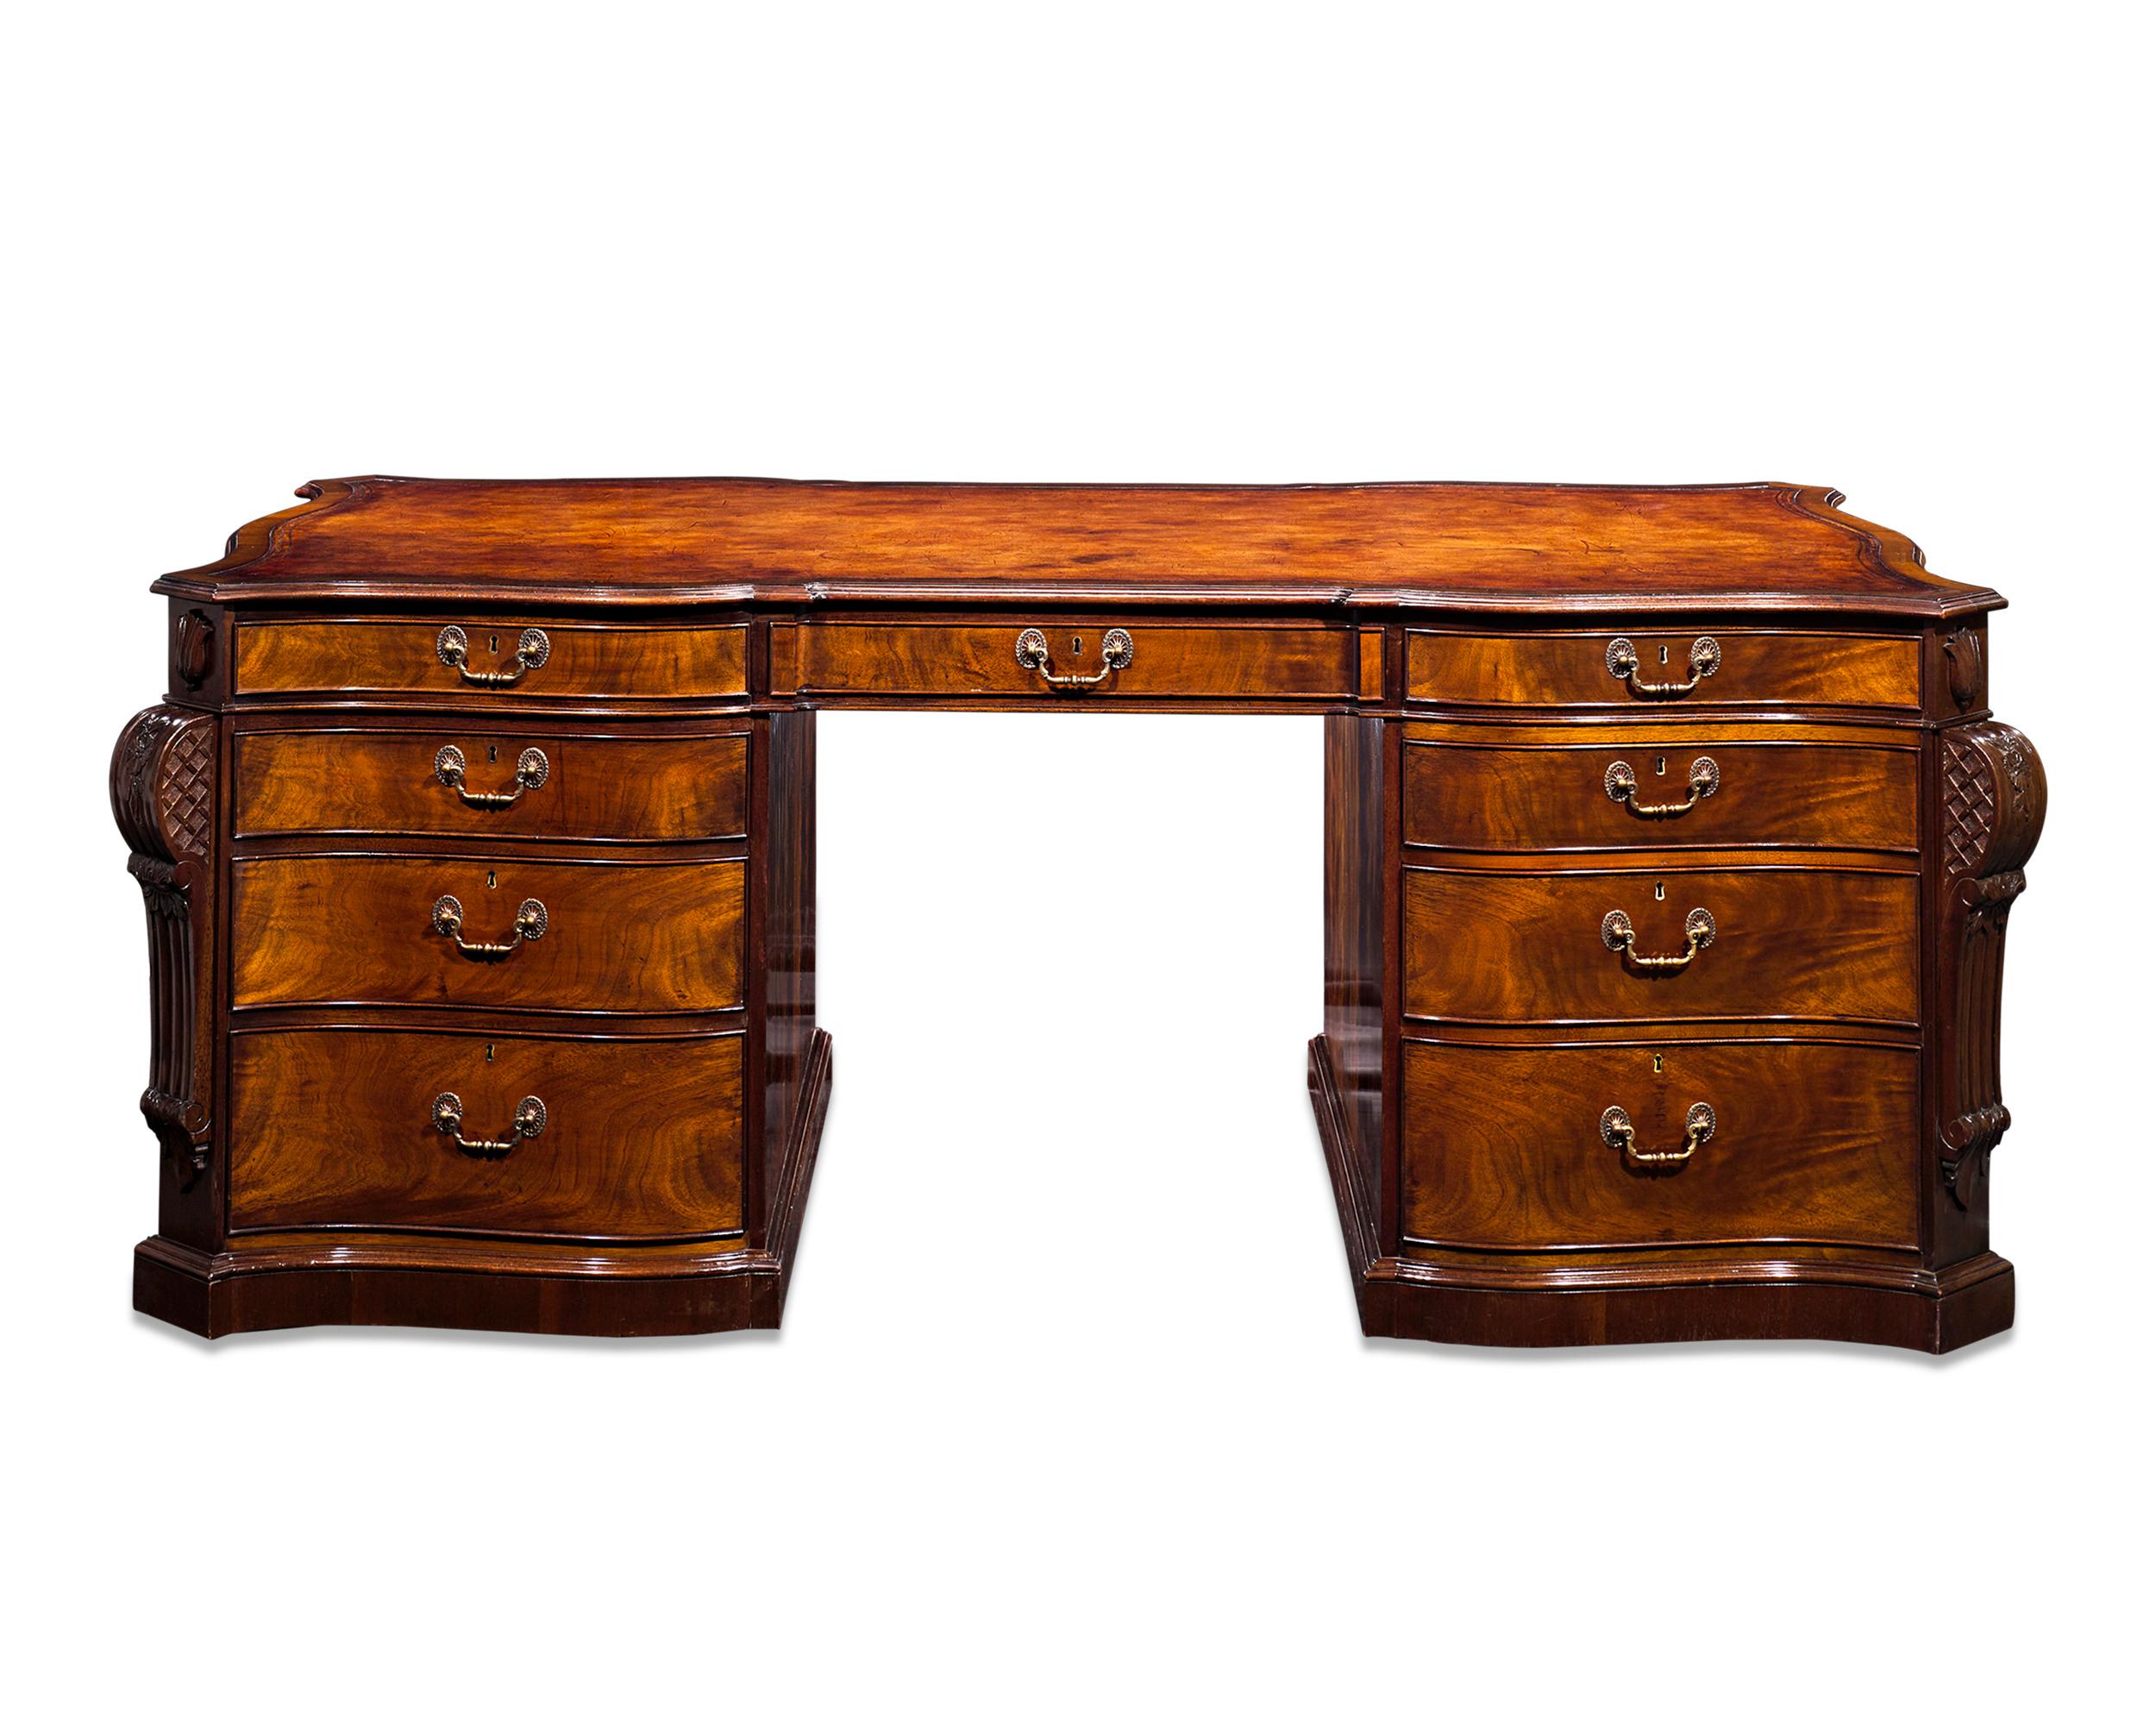 This extraordinary antique mahogany partner’s desk features a graceful serpentine form synonymous with the Rococo design pioneered by the famed Thomas Chippendale. Incorporating expertly carved molding and panelling on all sides, the desk is